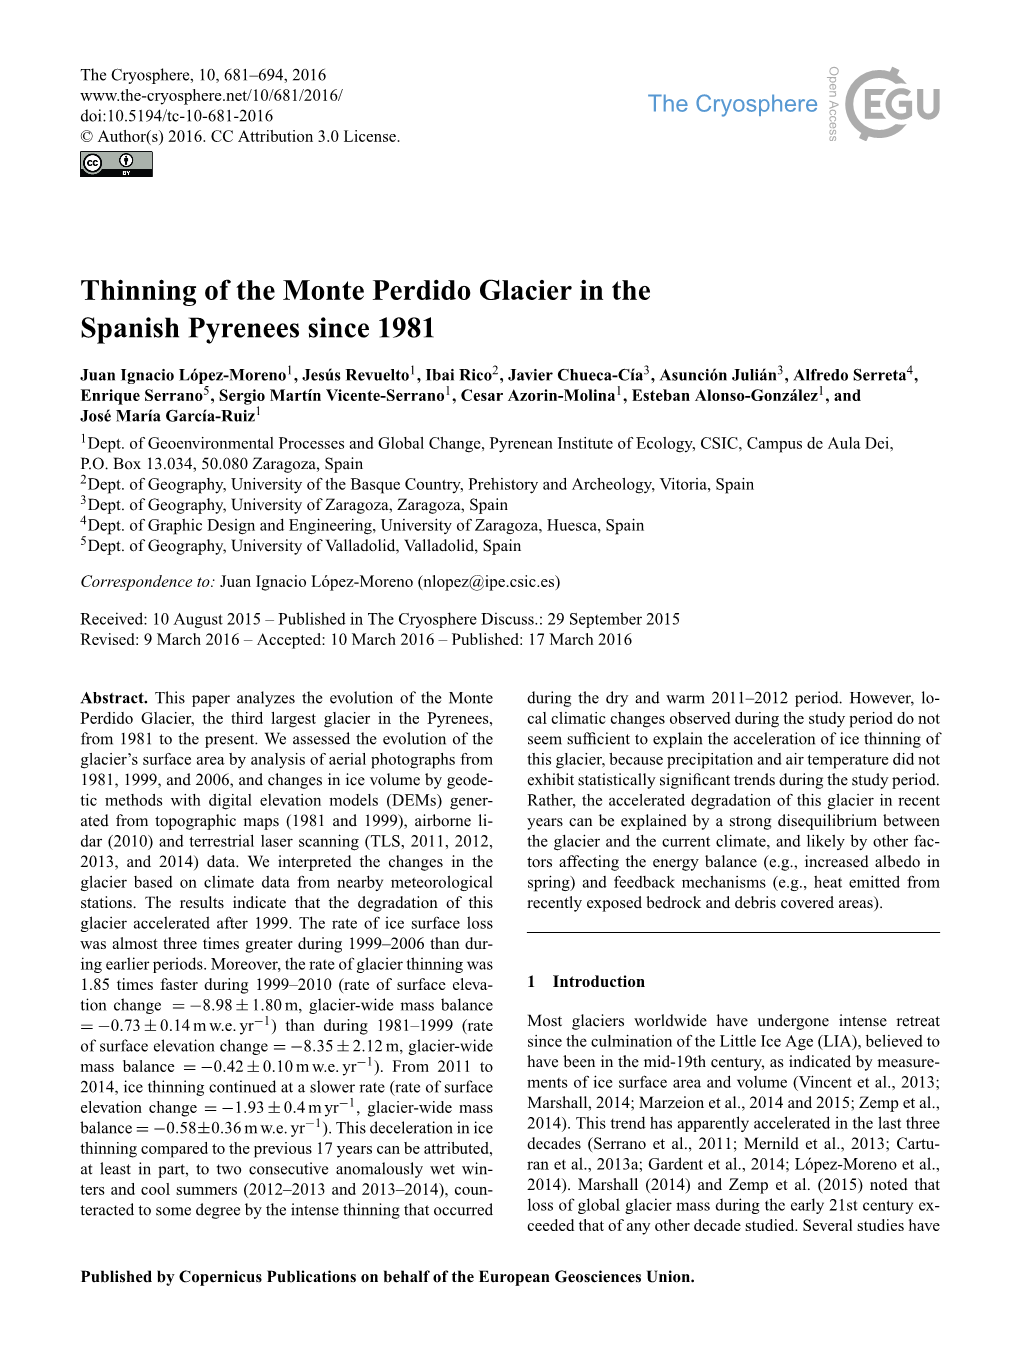 Thinning of the Monte Perdido Glacier in the Spanish Pyrenees Since 1981